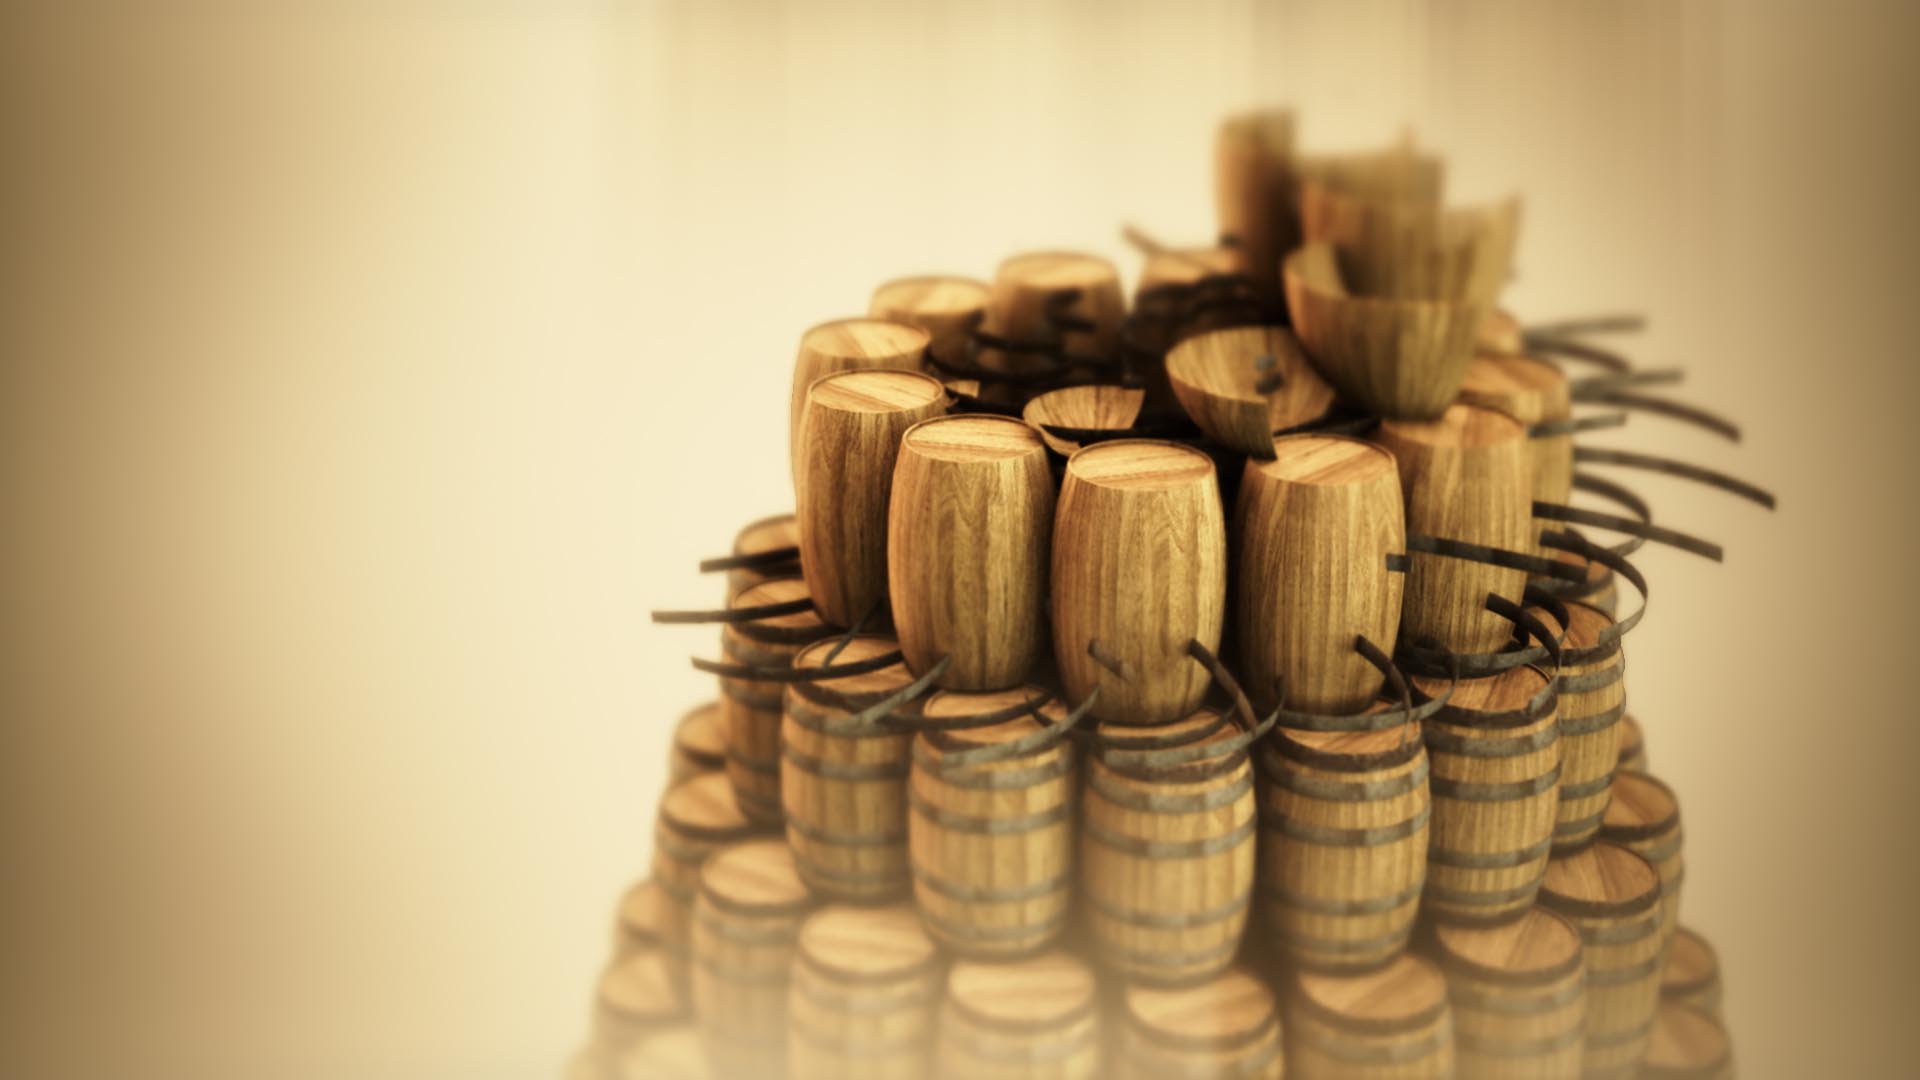 3D animation of a structure created from wooden barrels